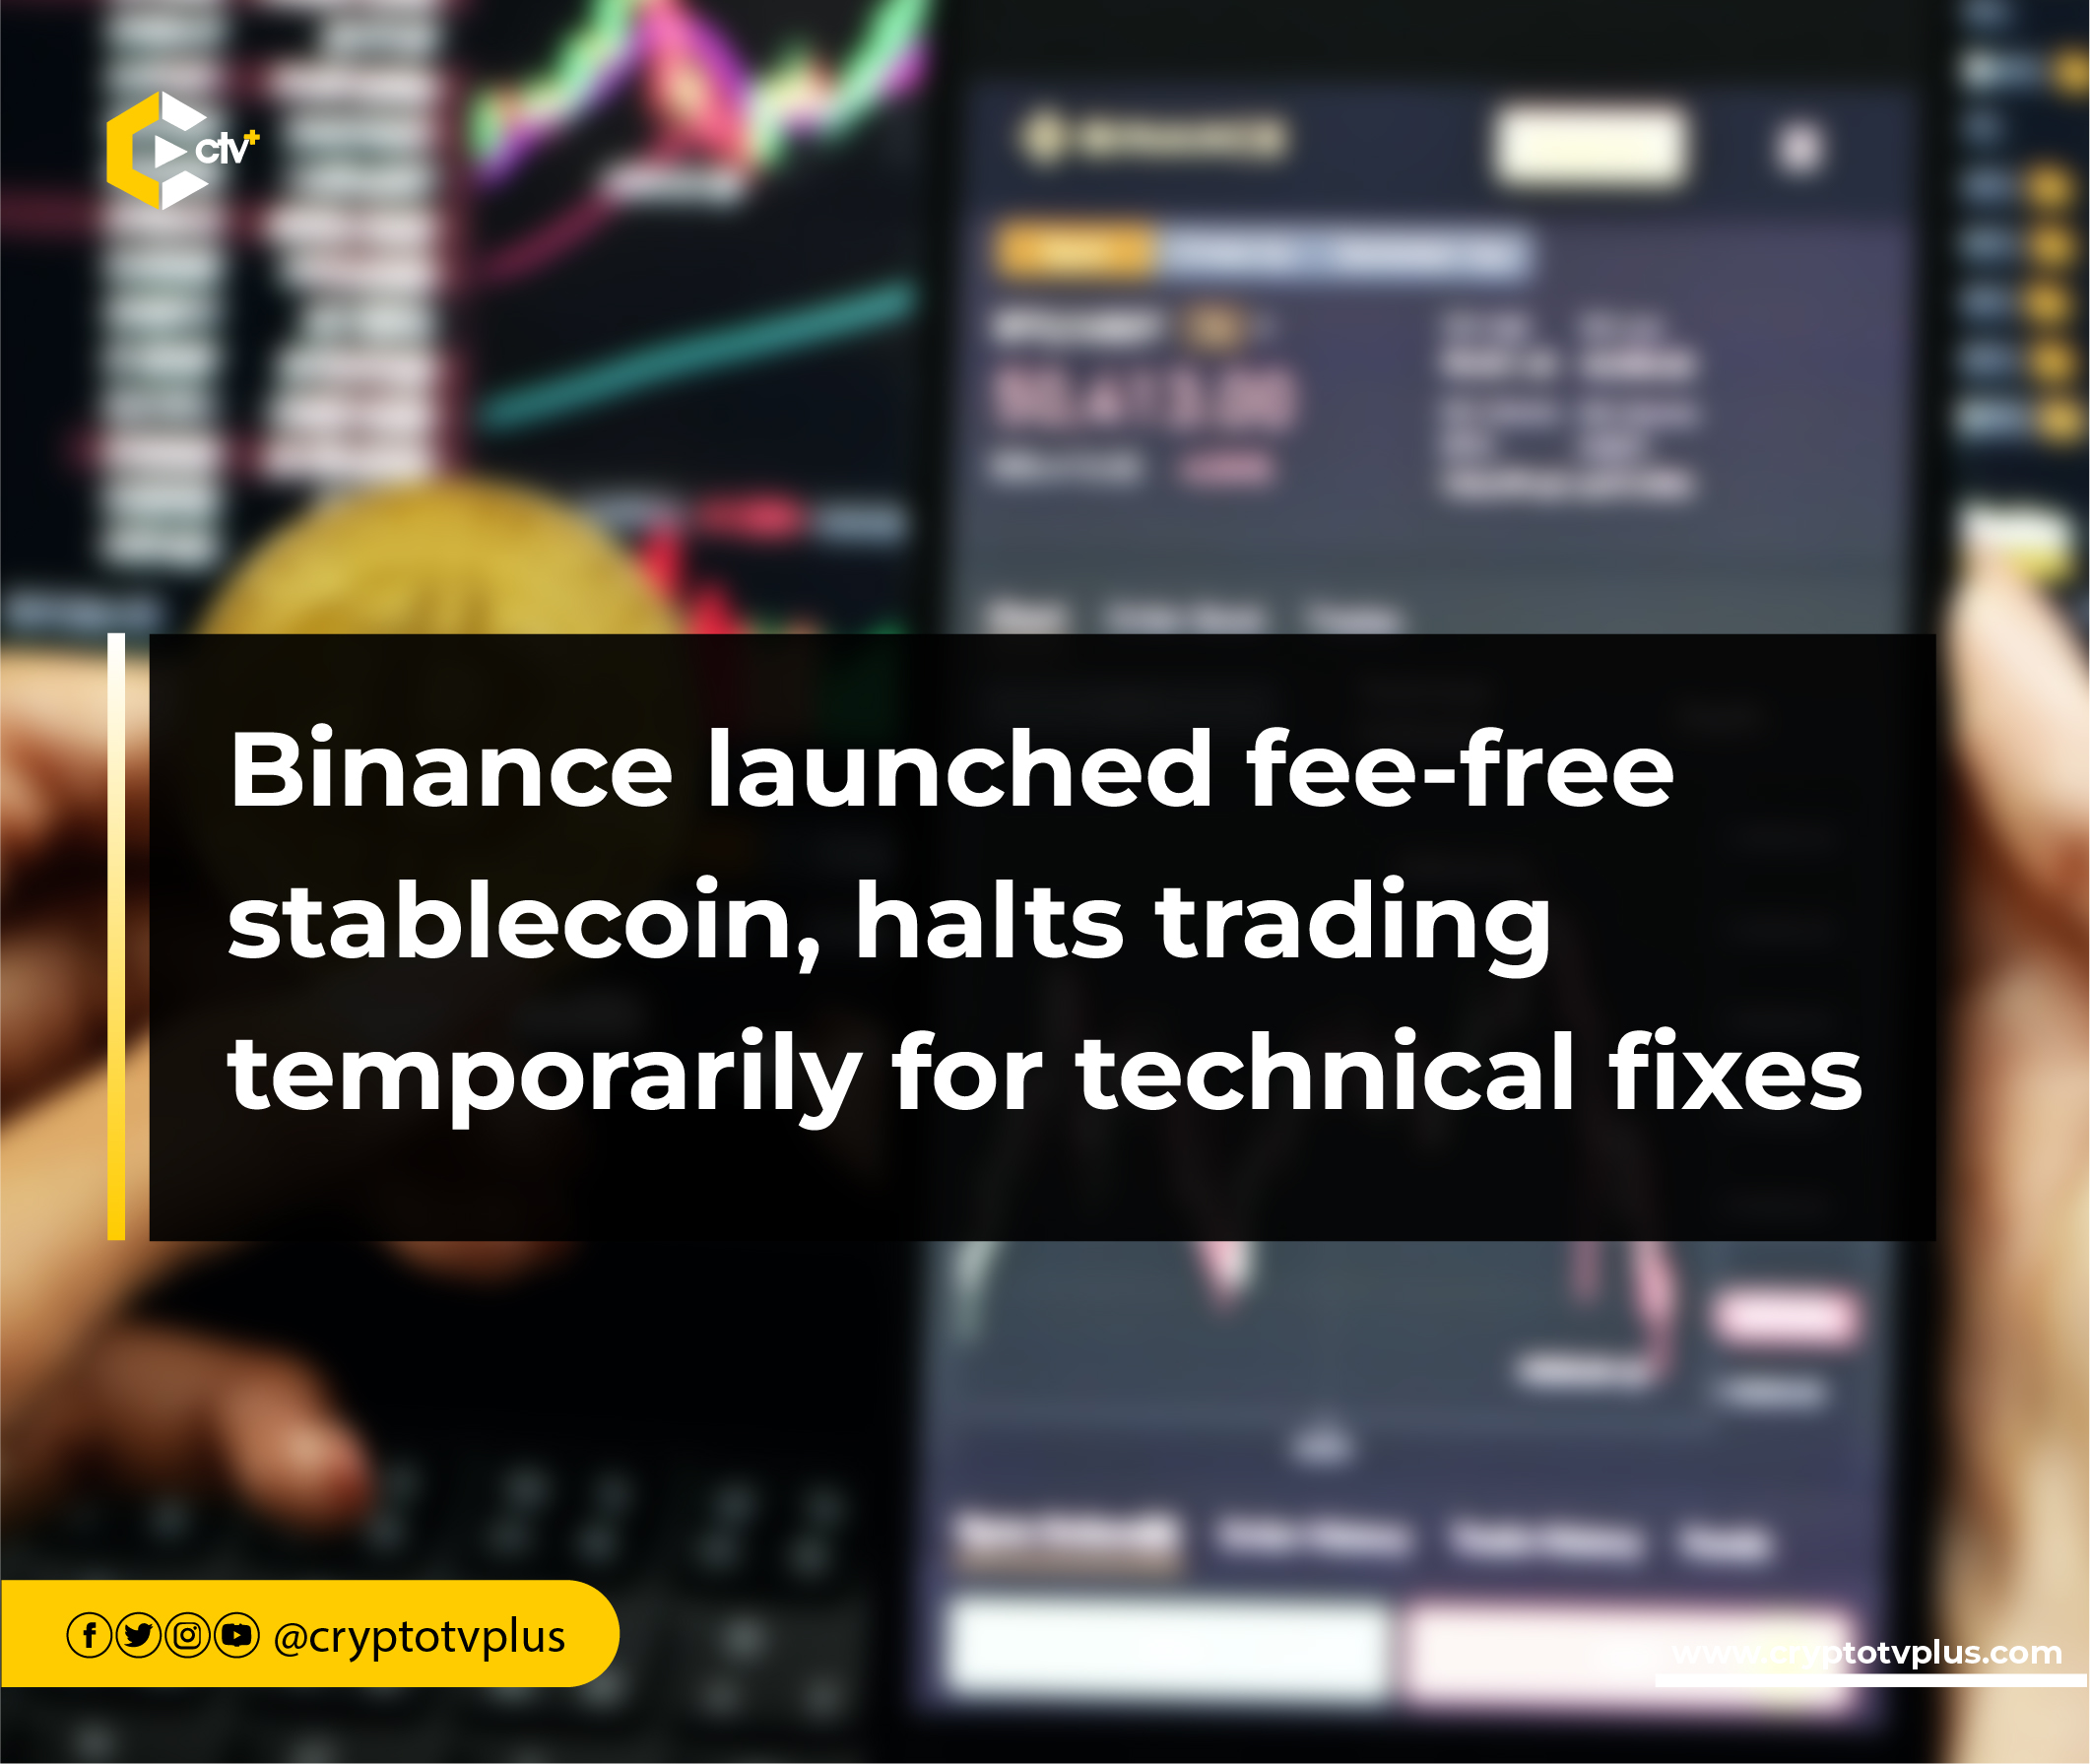 Binance Will Cease Support for Its BUSD Stablecoin on Dec. 15